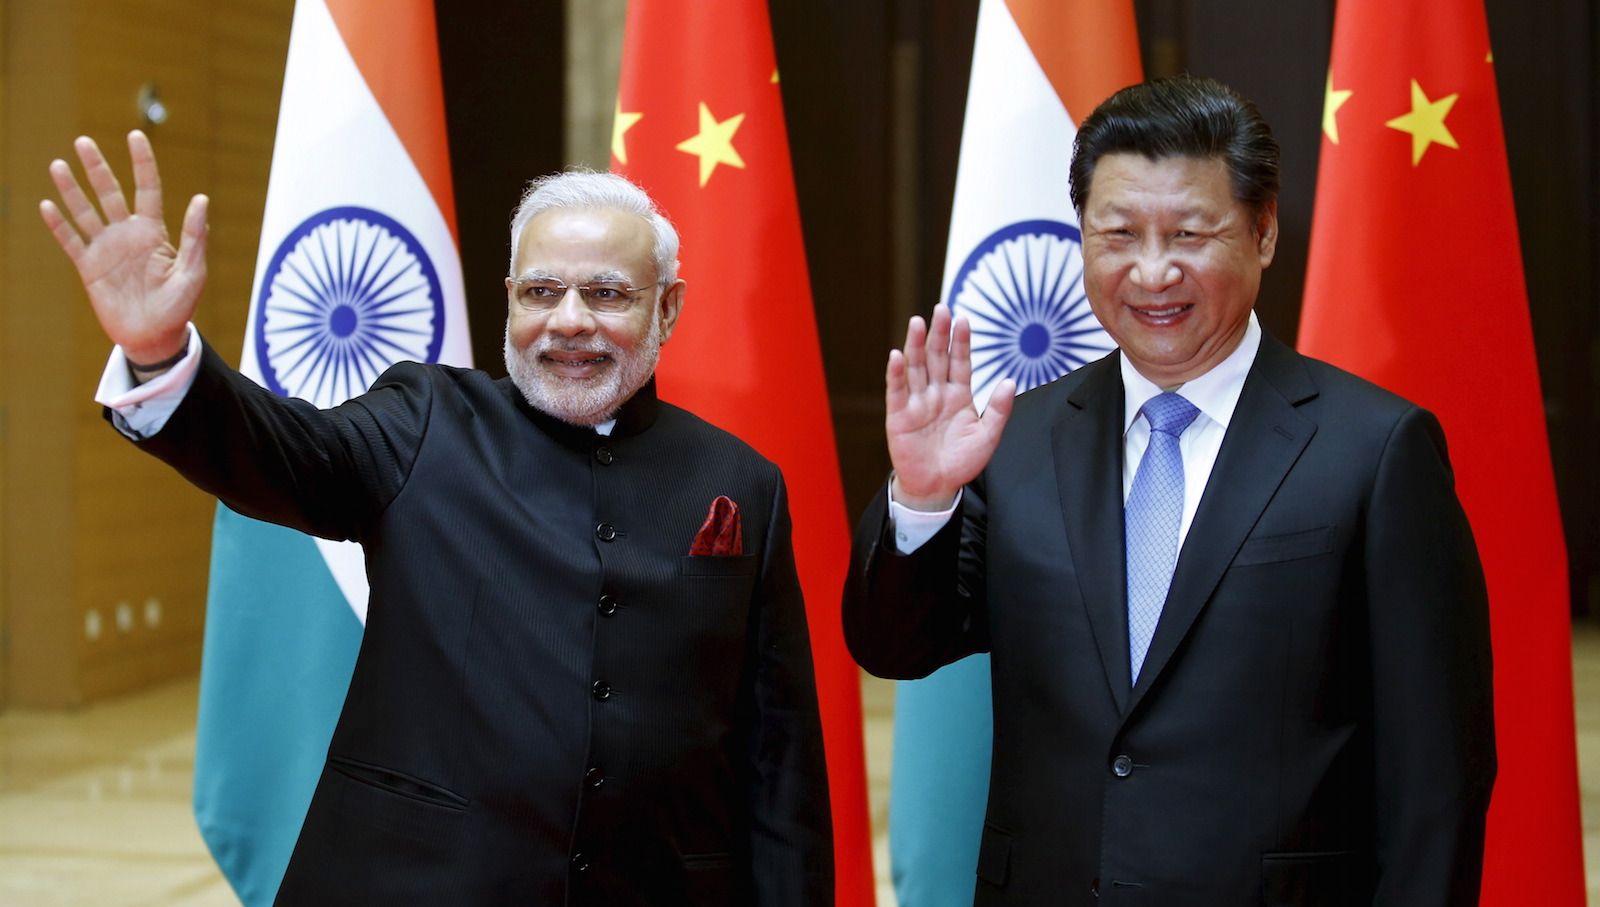 India and China: Two Very Different Paths to Development